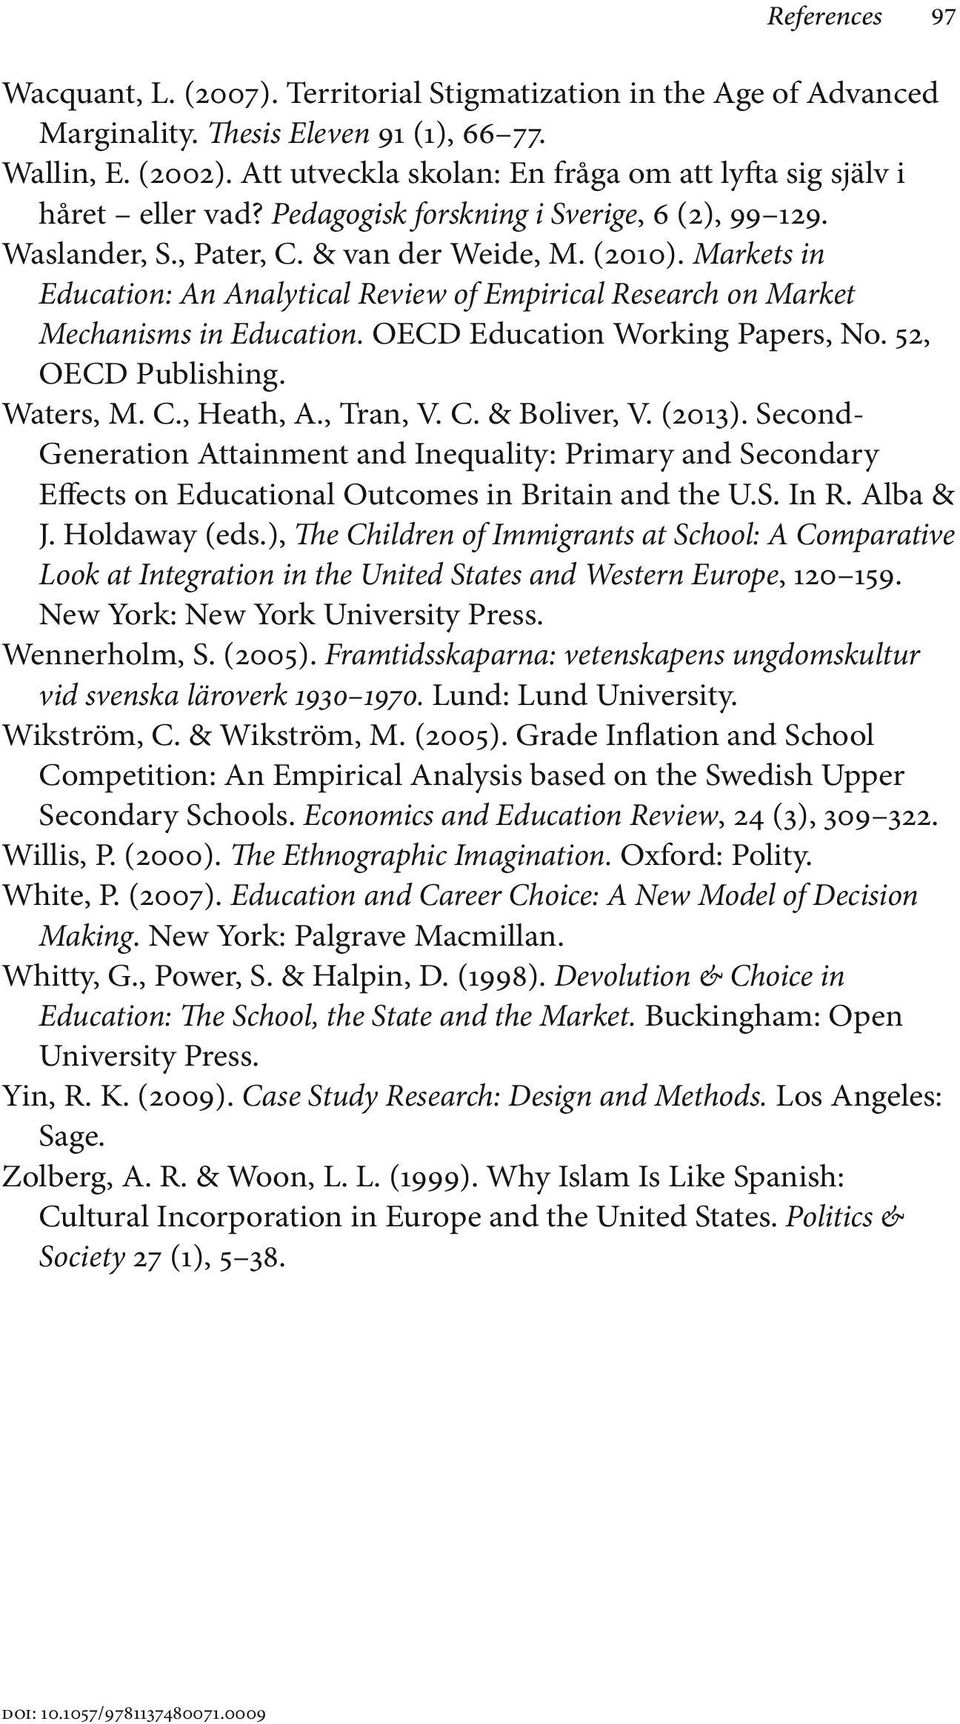 Markets in Education: An Analytical Review of Empirical Research on Market Mechanisms in Education. OECD Education Working Papers, No. 52, OECD Publishing. Waters, M. C., Heath, A., Tran, V. C. & Boliver, V.